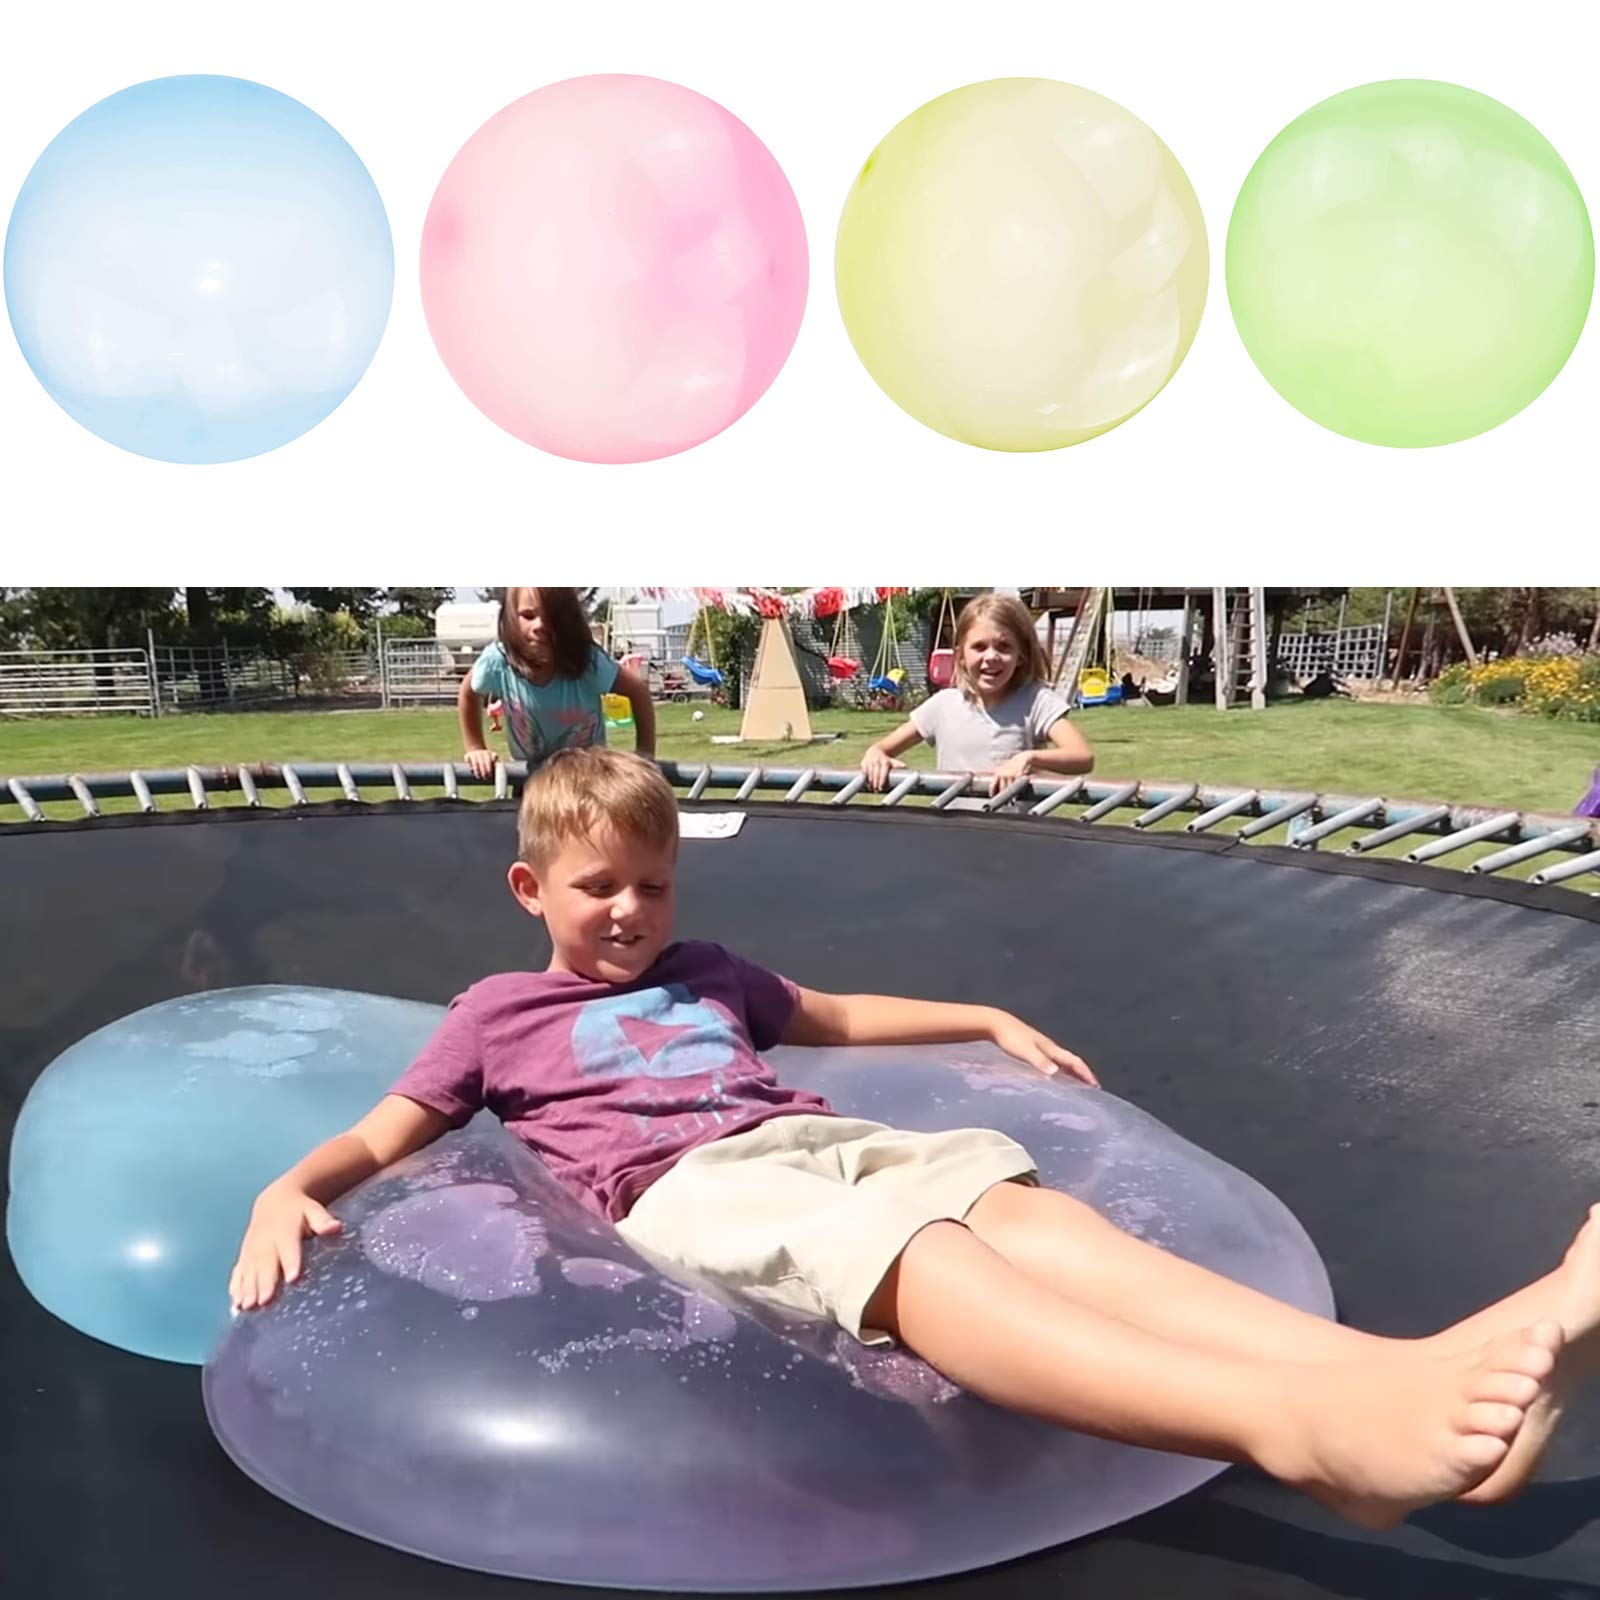 Outdoor Fun Inflatable Bubble Ball Bubble Ball for Water Large Transparent Balloon Inflatable Ball Soft Rubber Ball for Outdoor Indoor Play - image 1 of 8